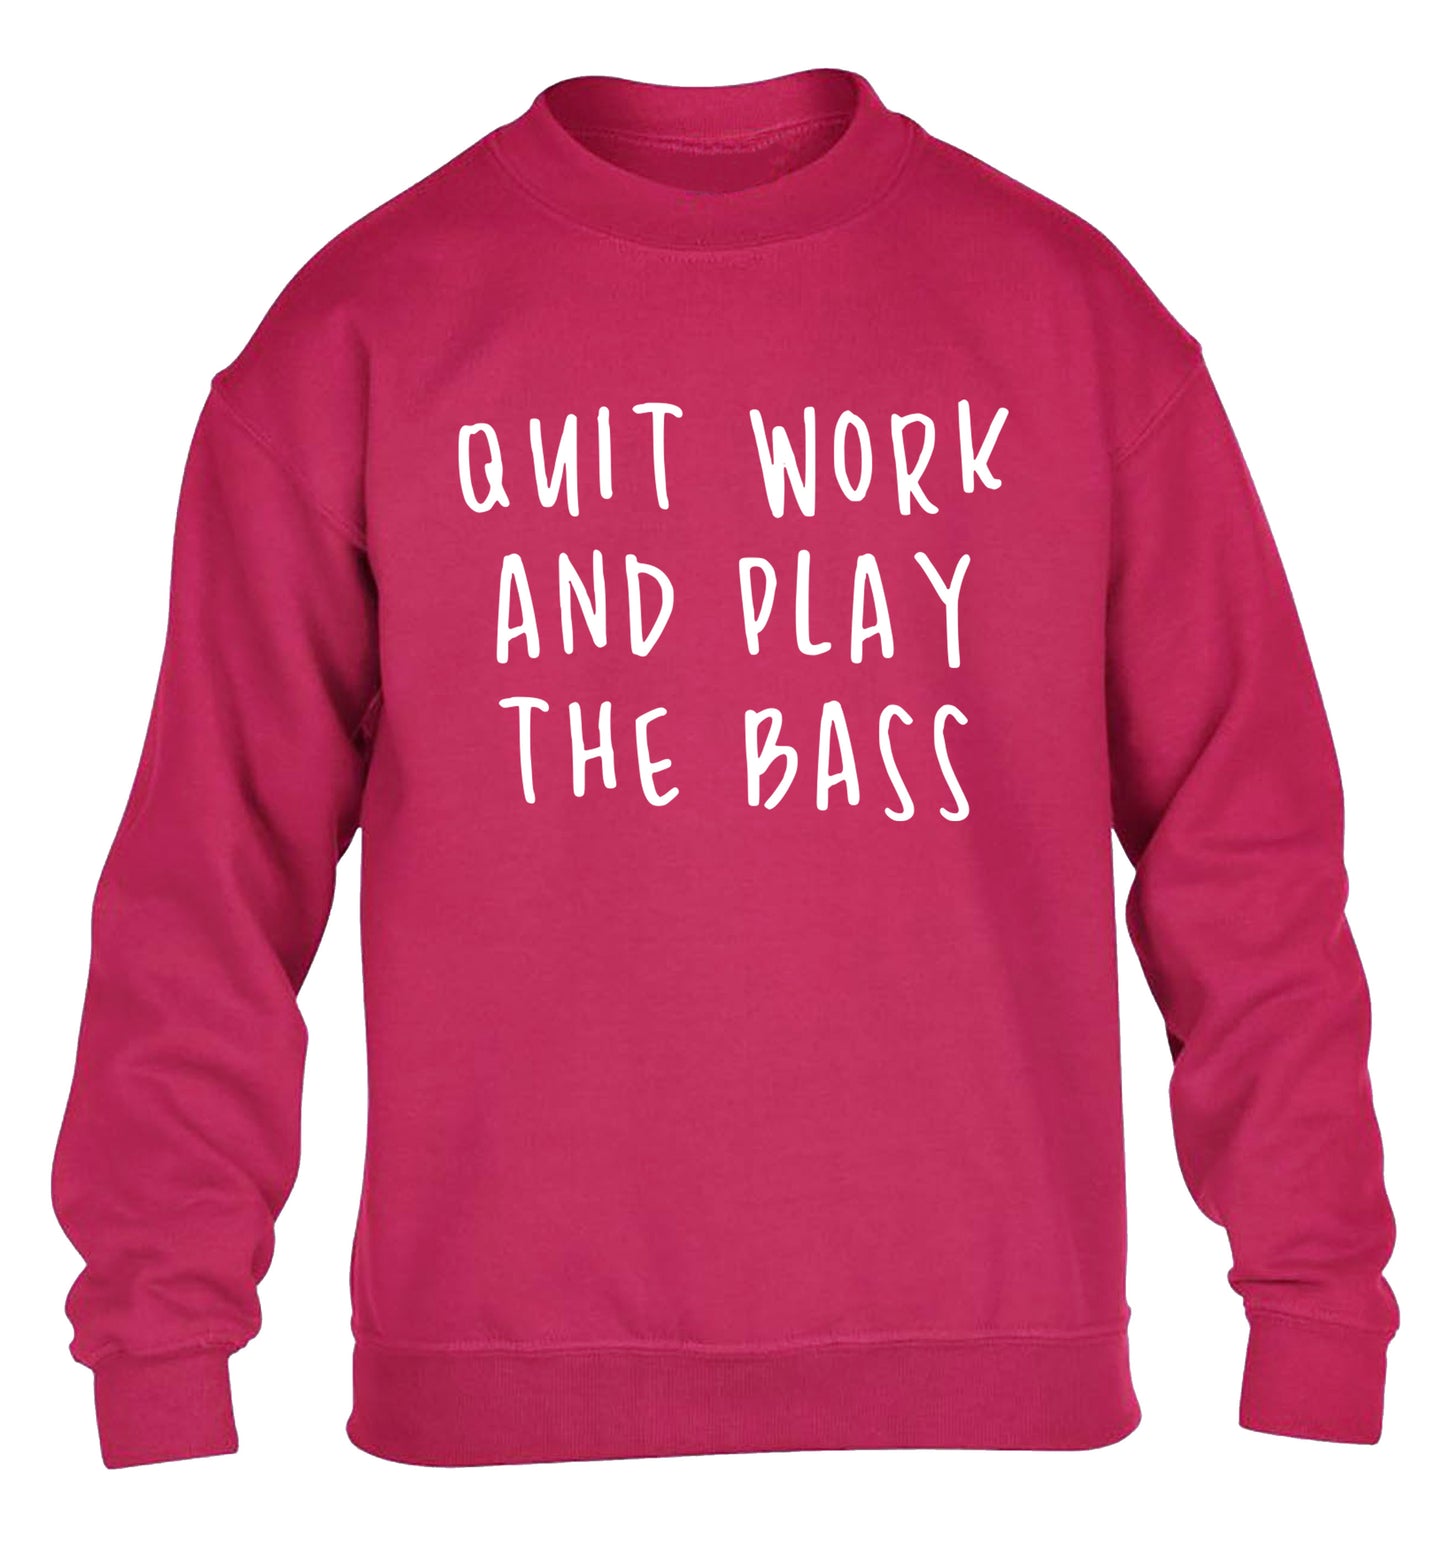 Quit work and play the bass children's pink sweater 12-14 Years